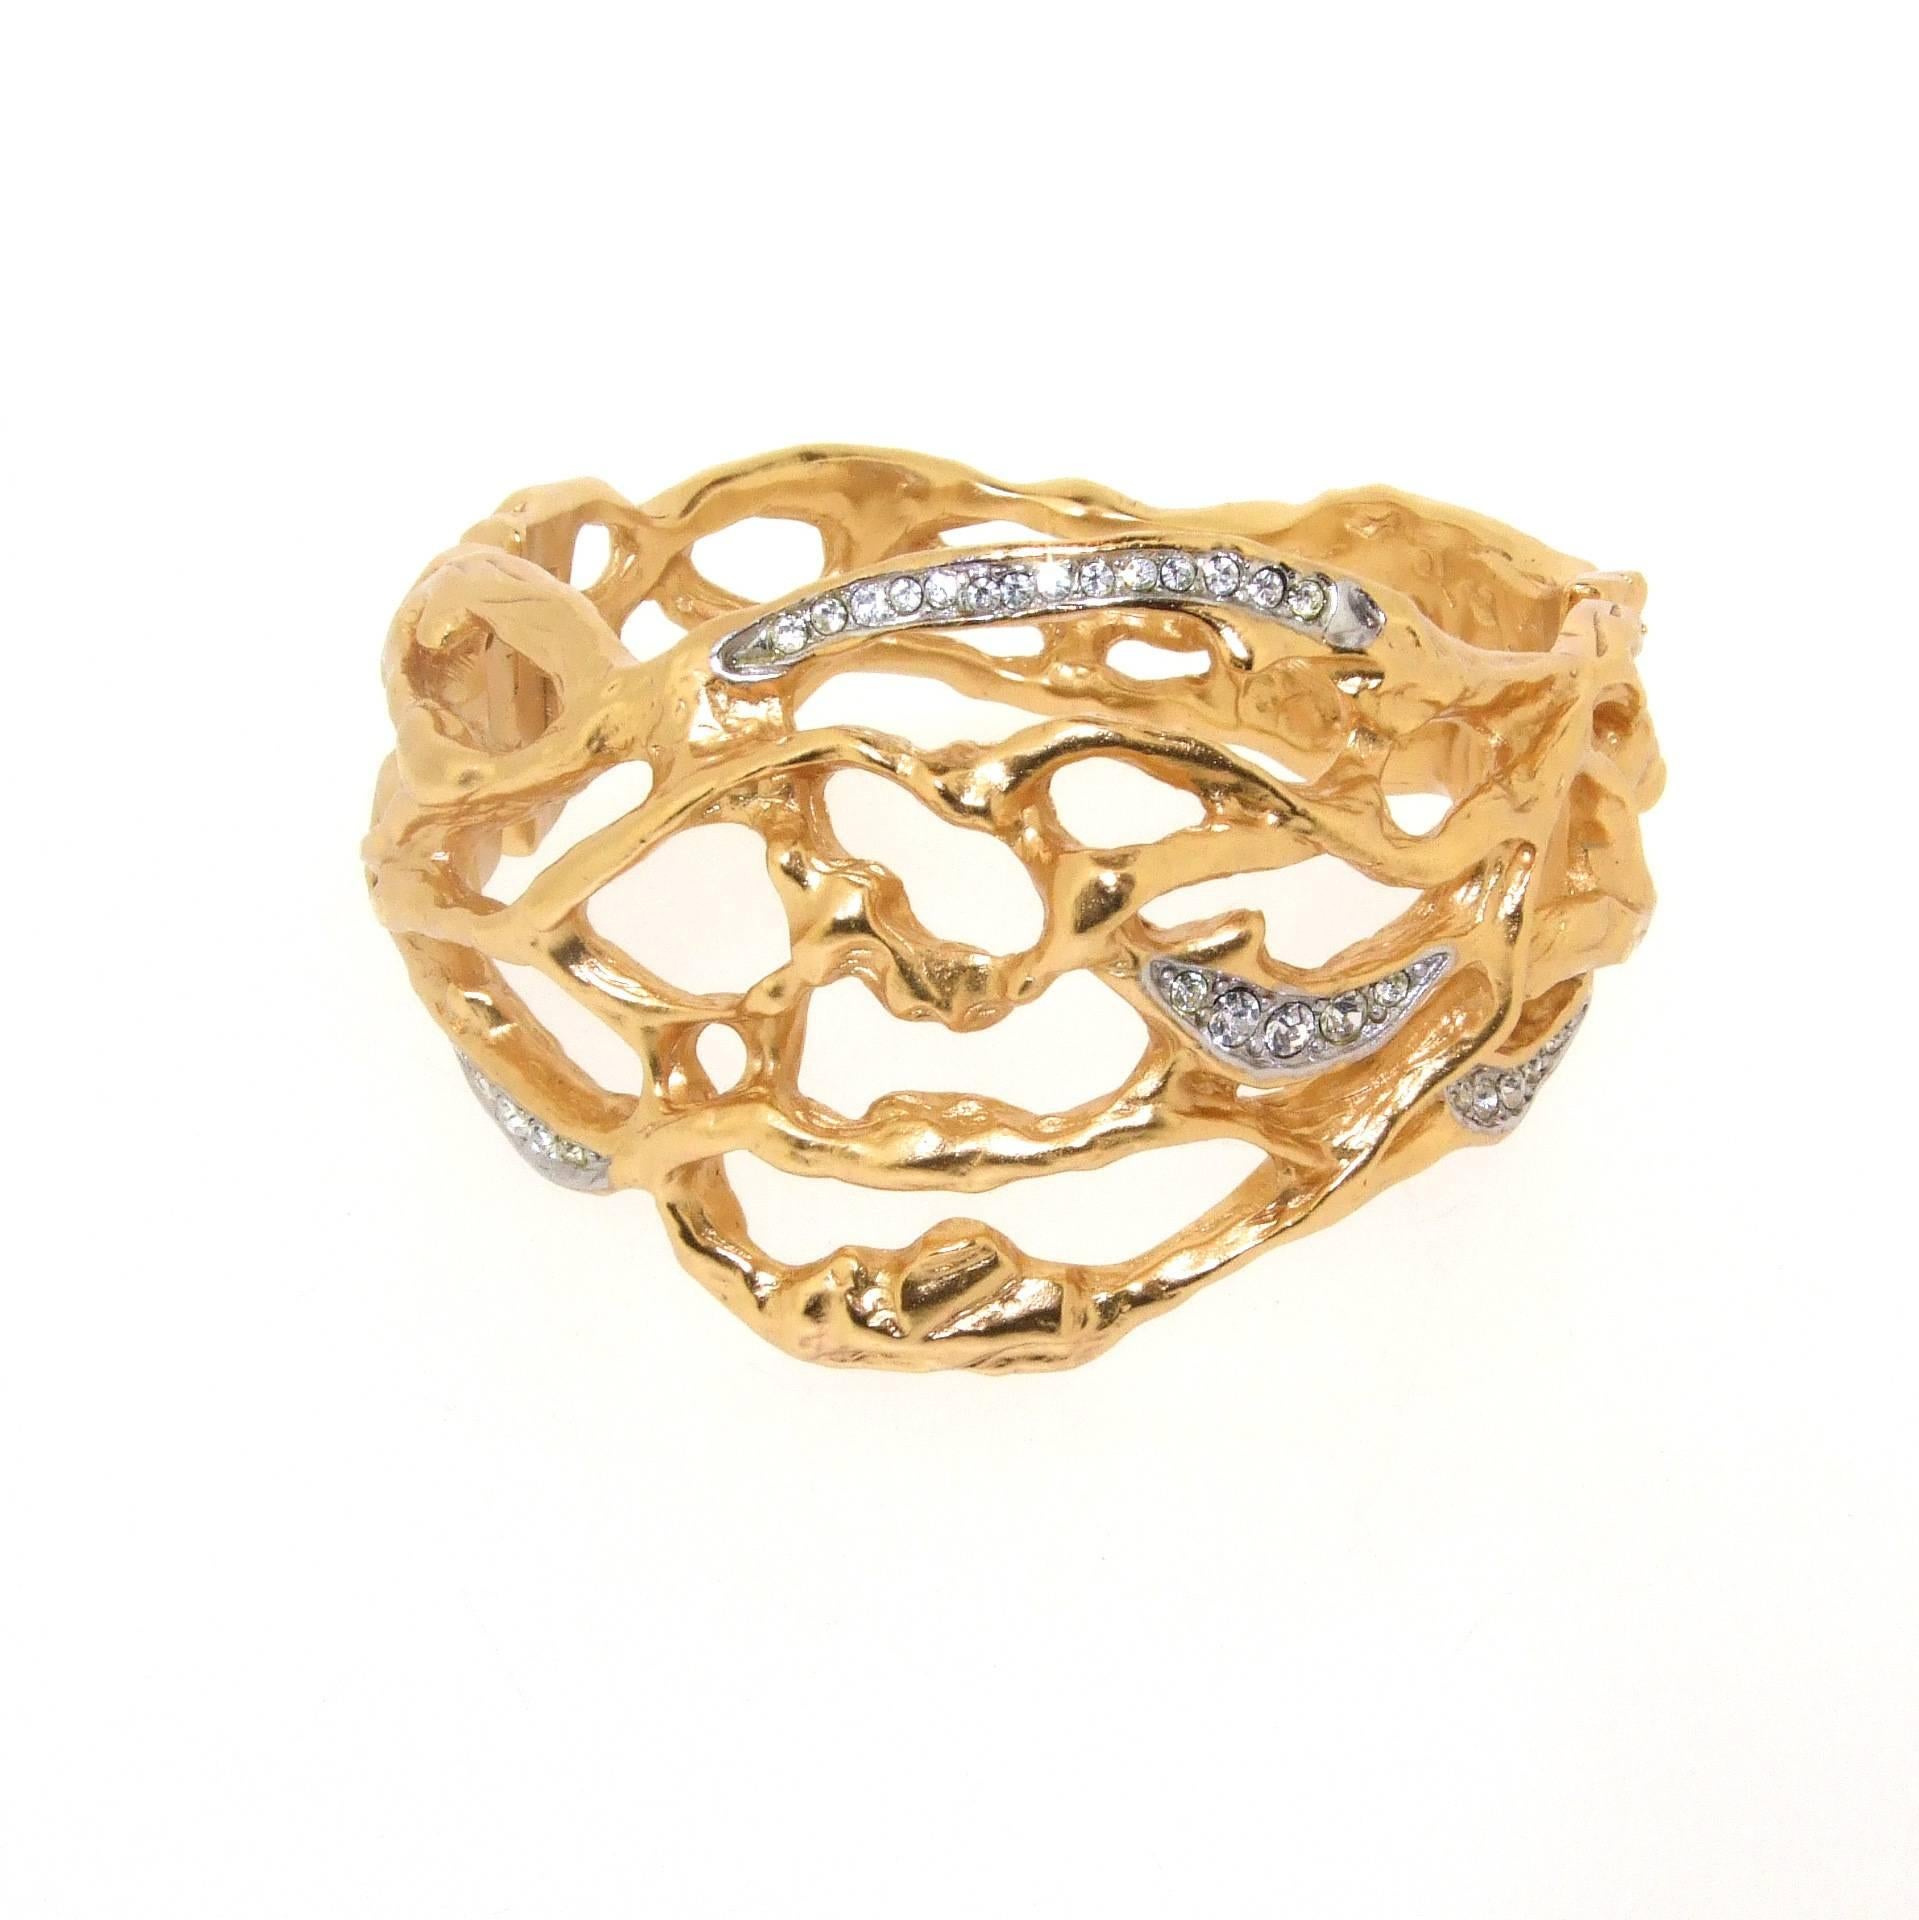 The 'Treasured Vine' clamper bracelet by Elizabeth Taylor for Avon. Crafted of openwork goldtone metal set with crystals. Symbolizing the intricate twinings of our lives and each sparkle representing a special moment.

Elizabeth Taylor designed